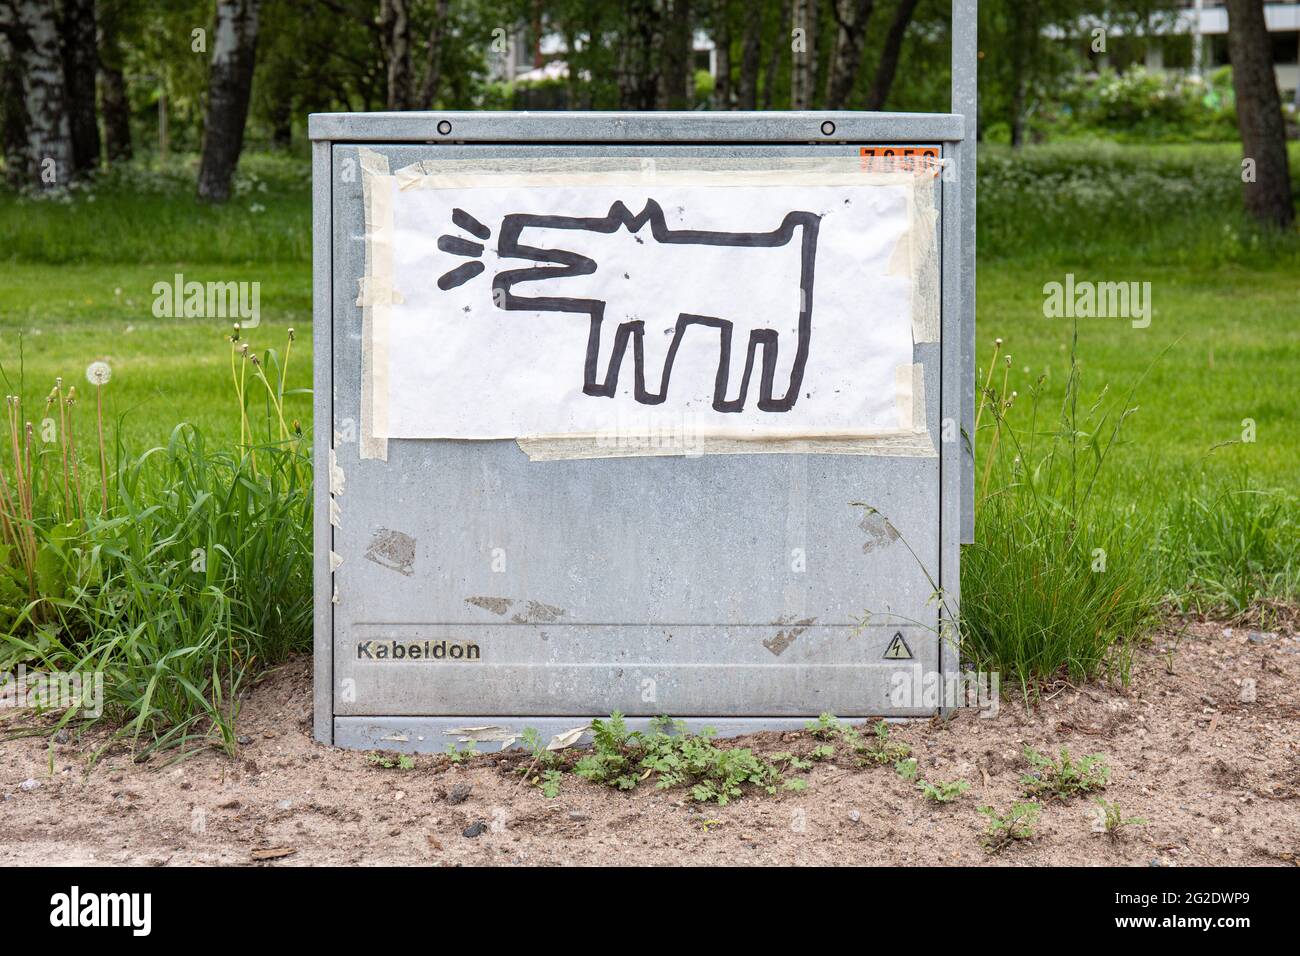 Hand-drawn barking dog poster on a electrical enclosure in Etelä-Haaga district of Helsinki, Finland Stock Photo